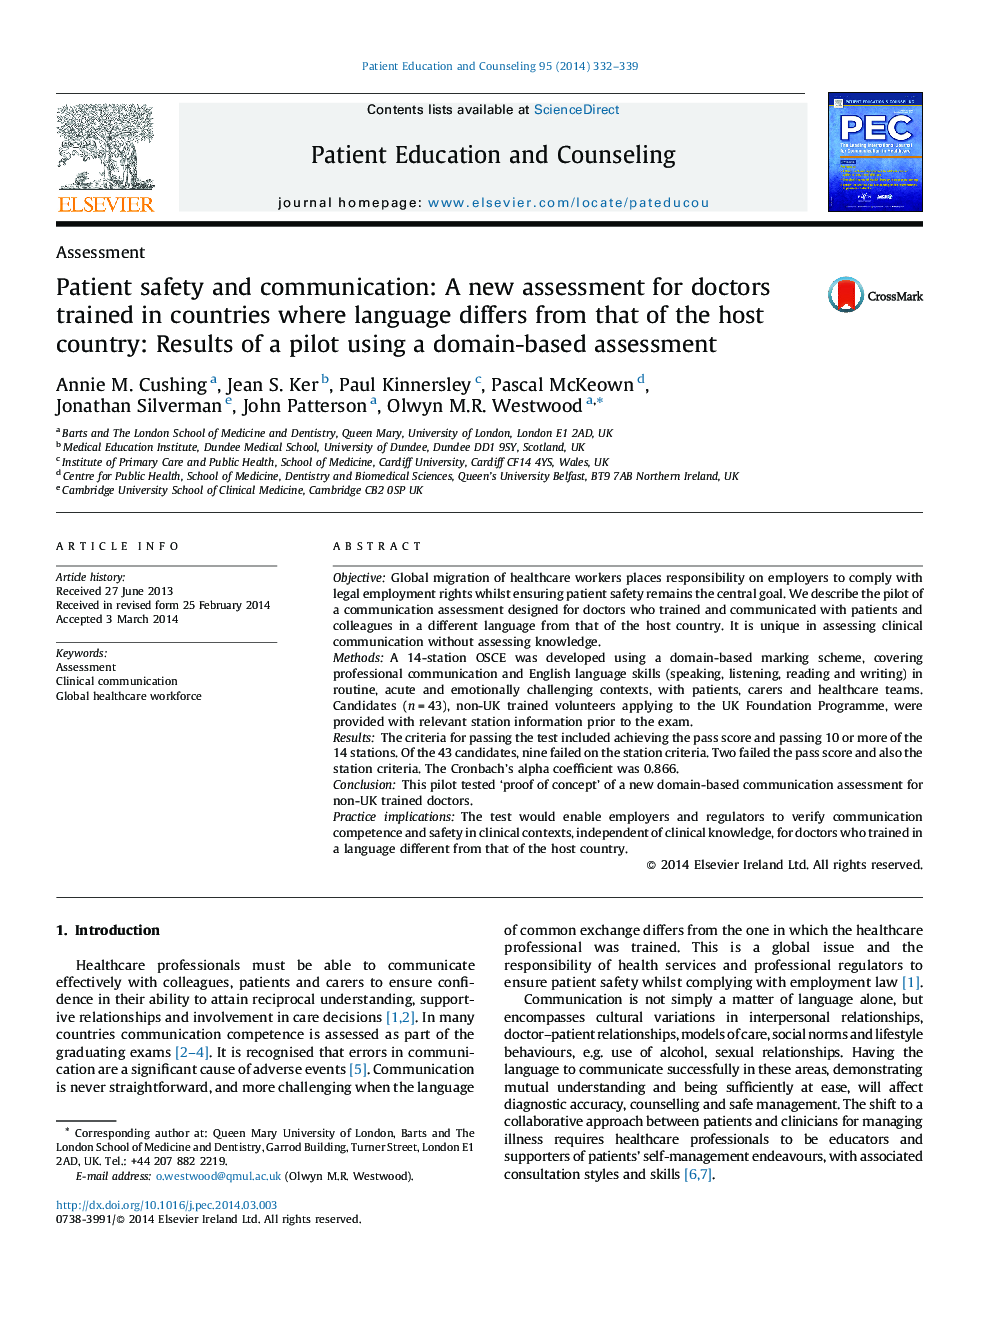 Patient safety and communication: A new assessment for doctors trained in countries where language differs from that of the host country: Results of a pilot using a domain-based assessment